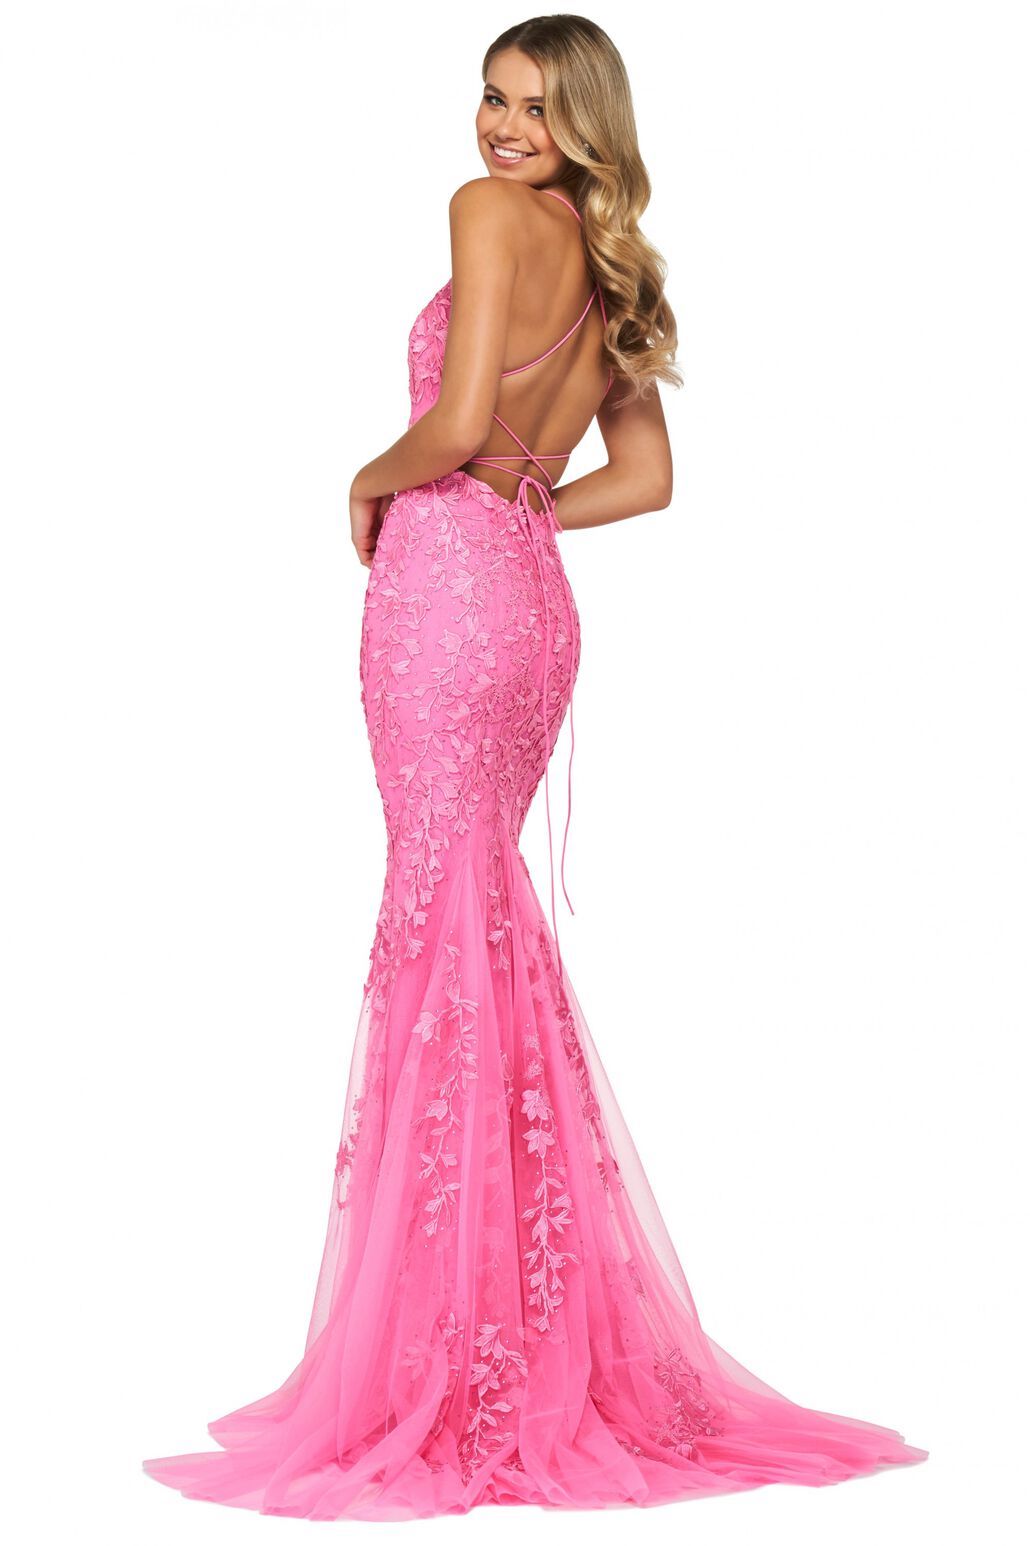 Leaf lace appliqued prom dress with fitted gown, flared hem, straight neckline, and lace-up back, sold by Madelines Boutique, Sherri Hill style #52338, Bright Pink